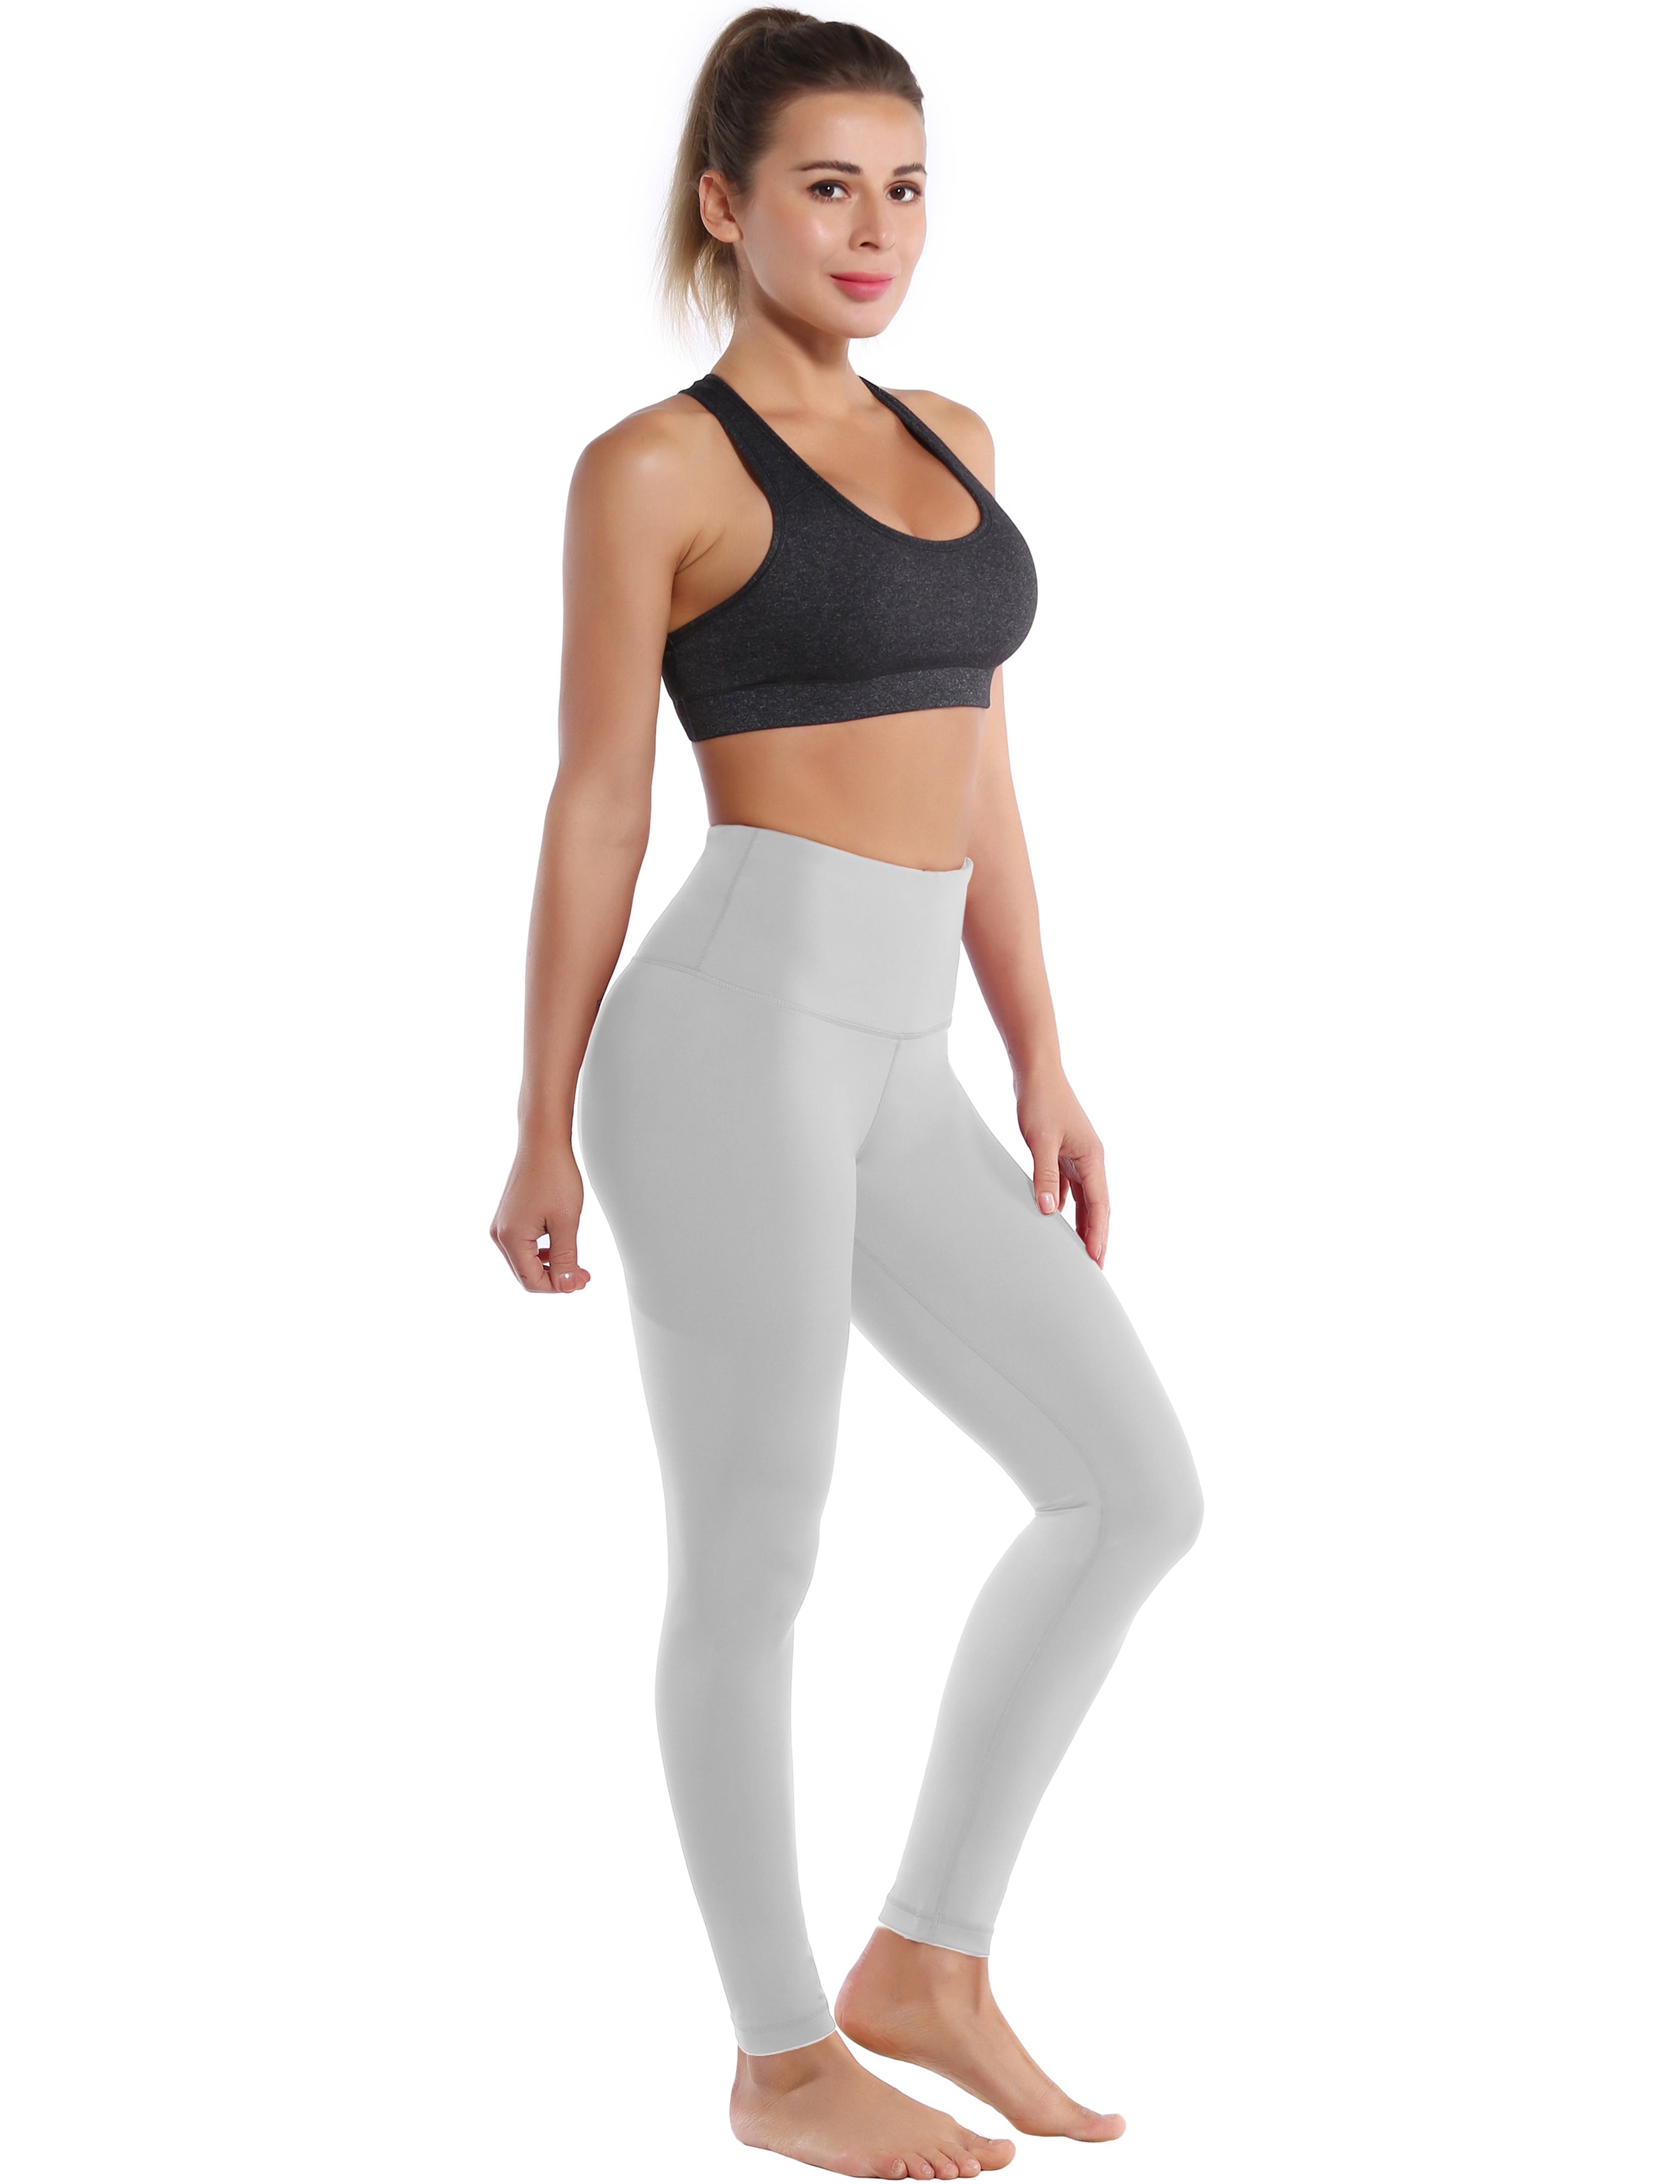 High Waist Pilates Pants lightgray 75%Nylon/25%Spandex Fabric doesn't attract lint easily 4-way stretch No see-through Moisture-wicking Tummy control Inner pocket Four lengths